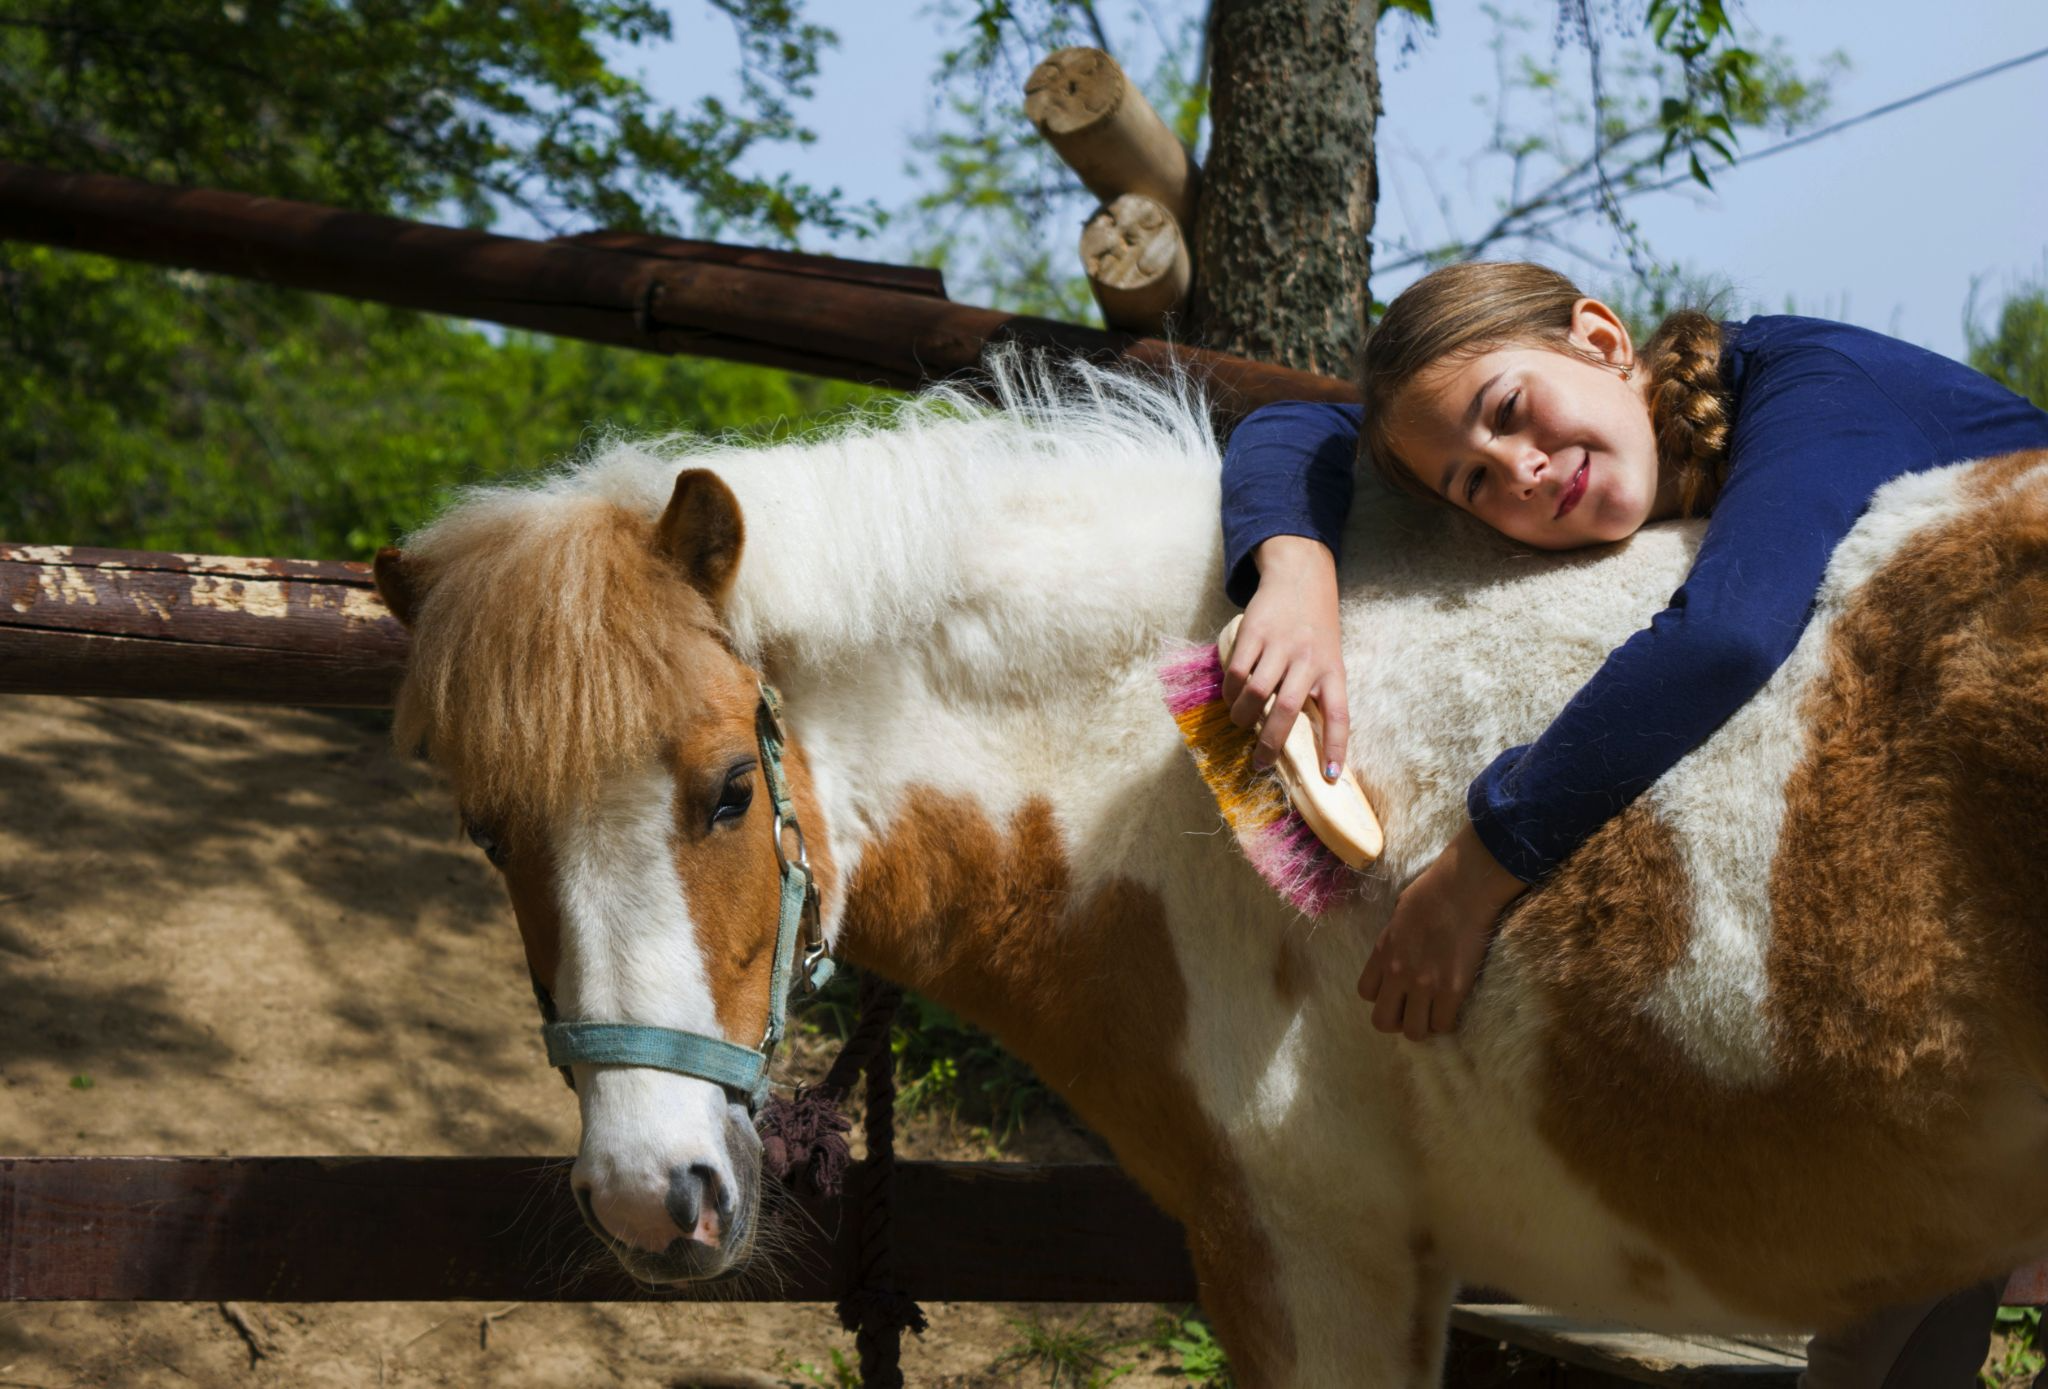 Child smiling and relaxing stomach-first over a horse's back with brush